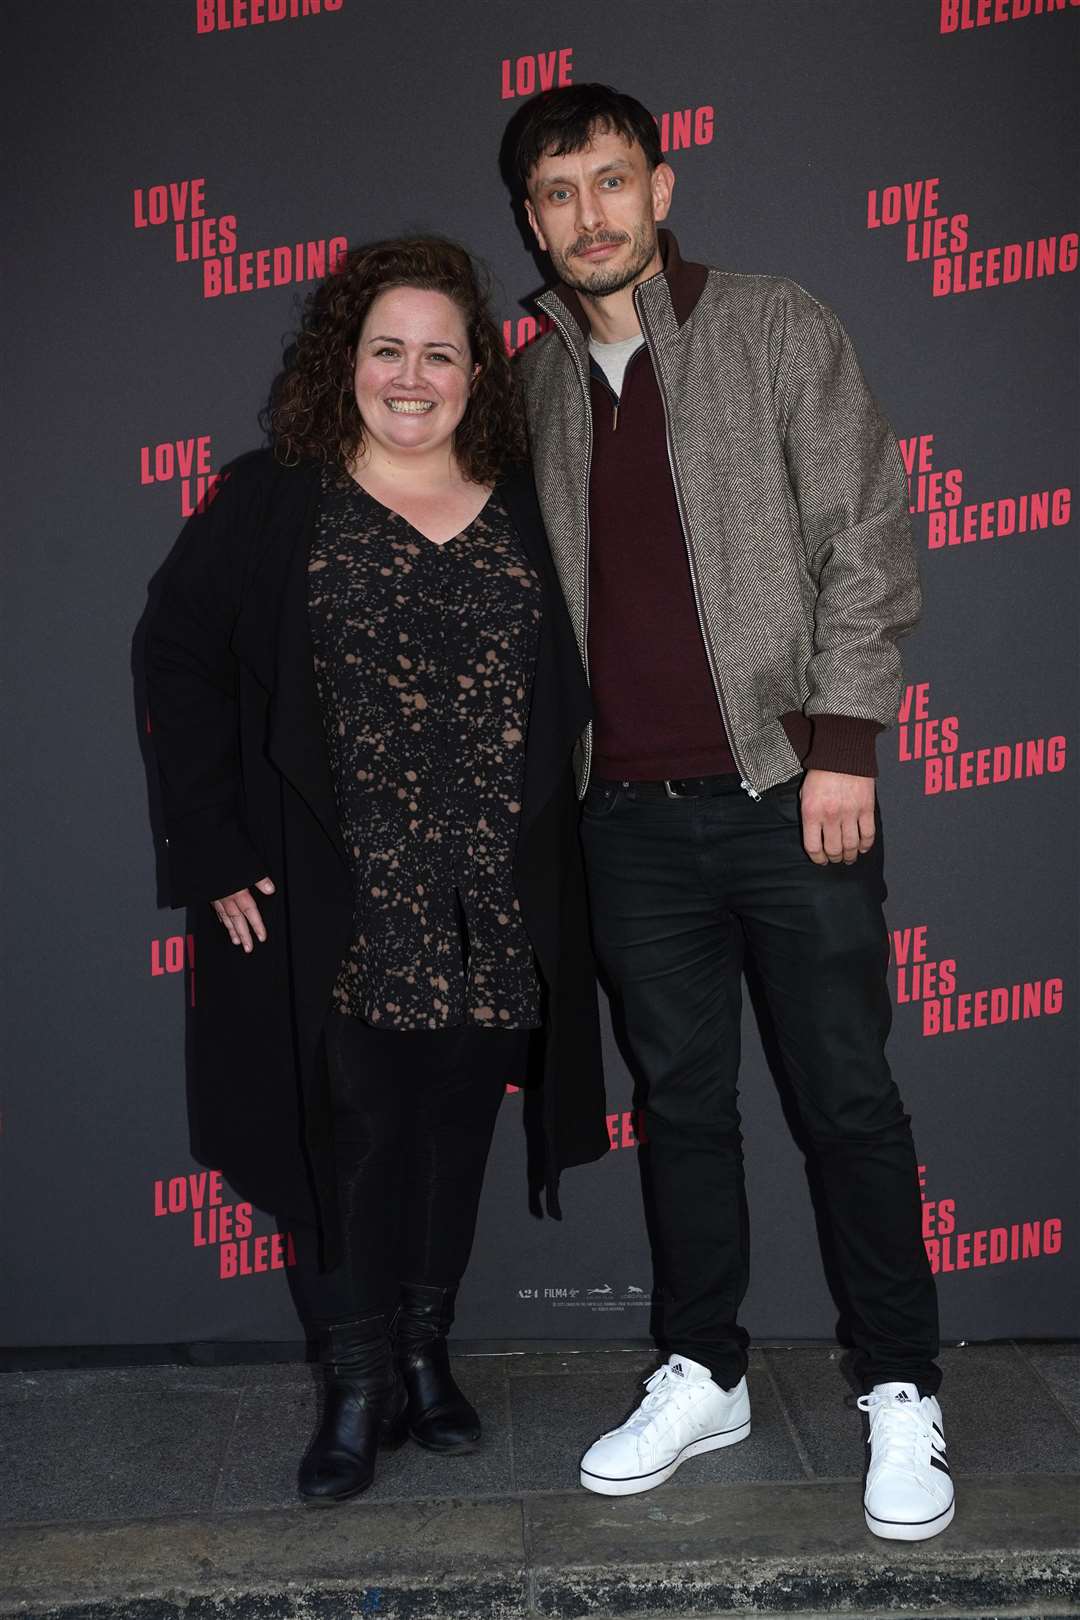 Jessica Gunning and Richard Gadd attending a gala screening of Love Lies Bleeding at the Prince Charles Theatre in central London (Lucy North/PA)